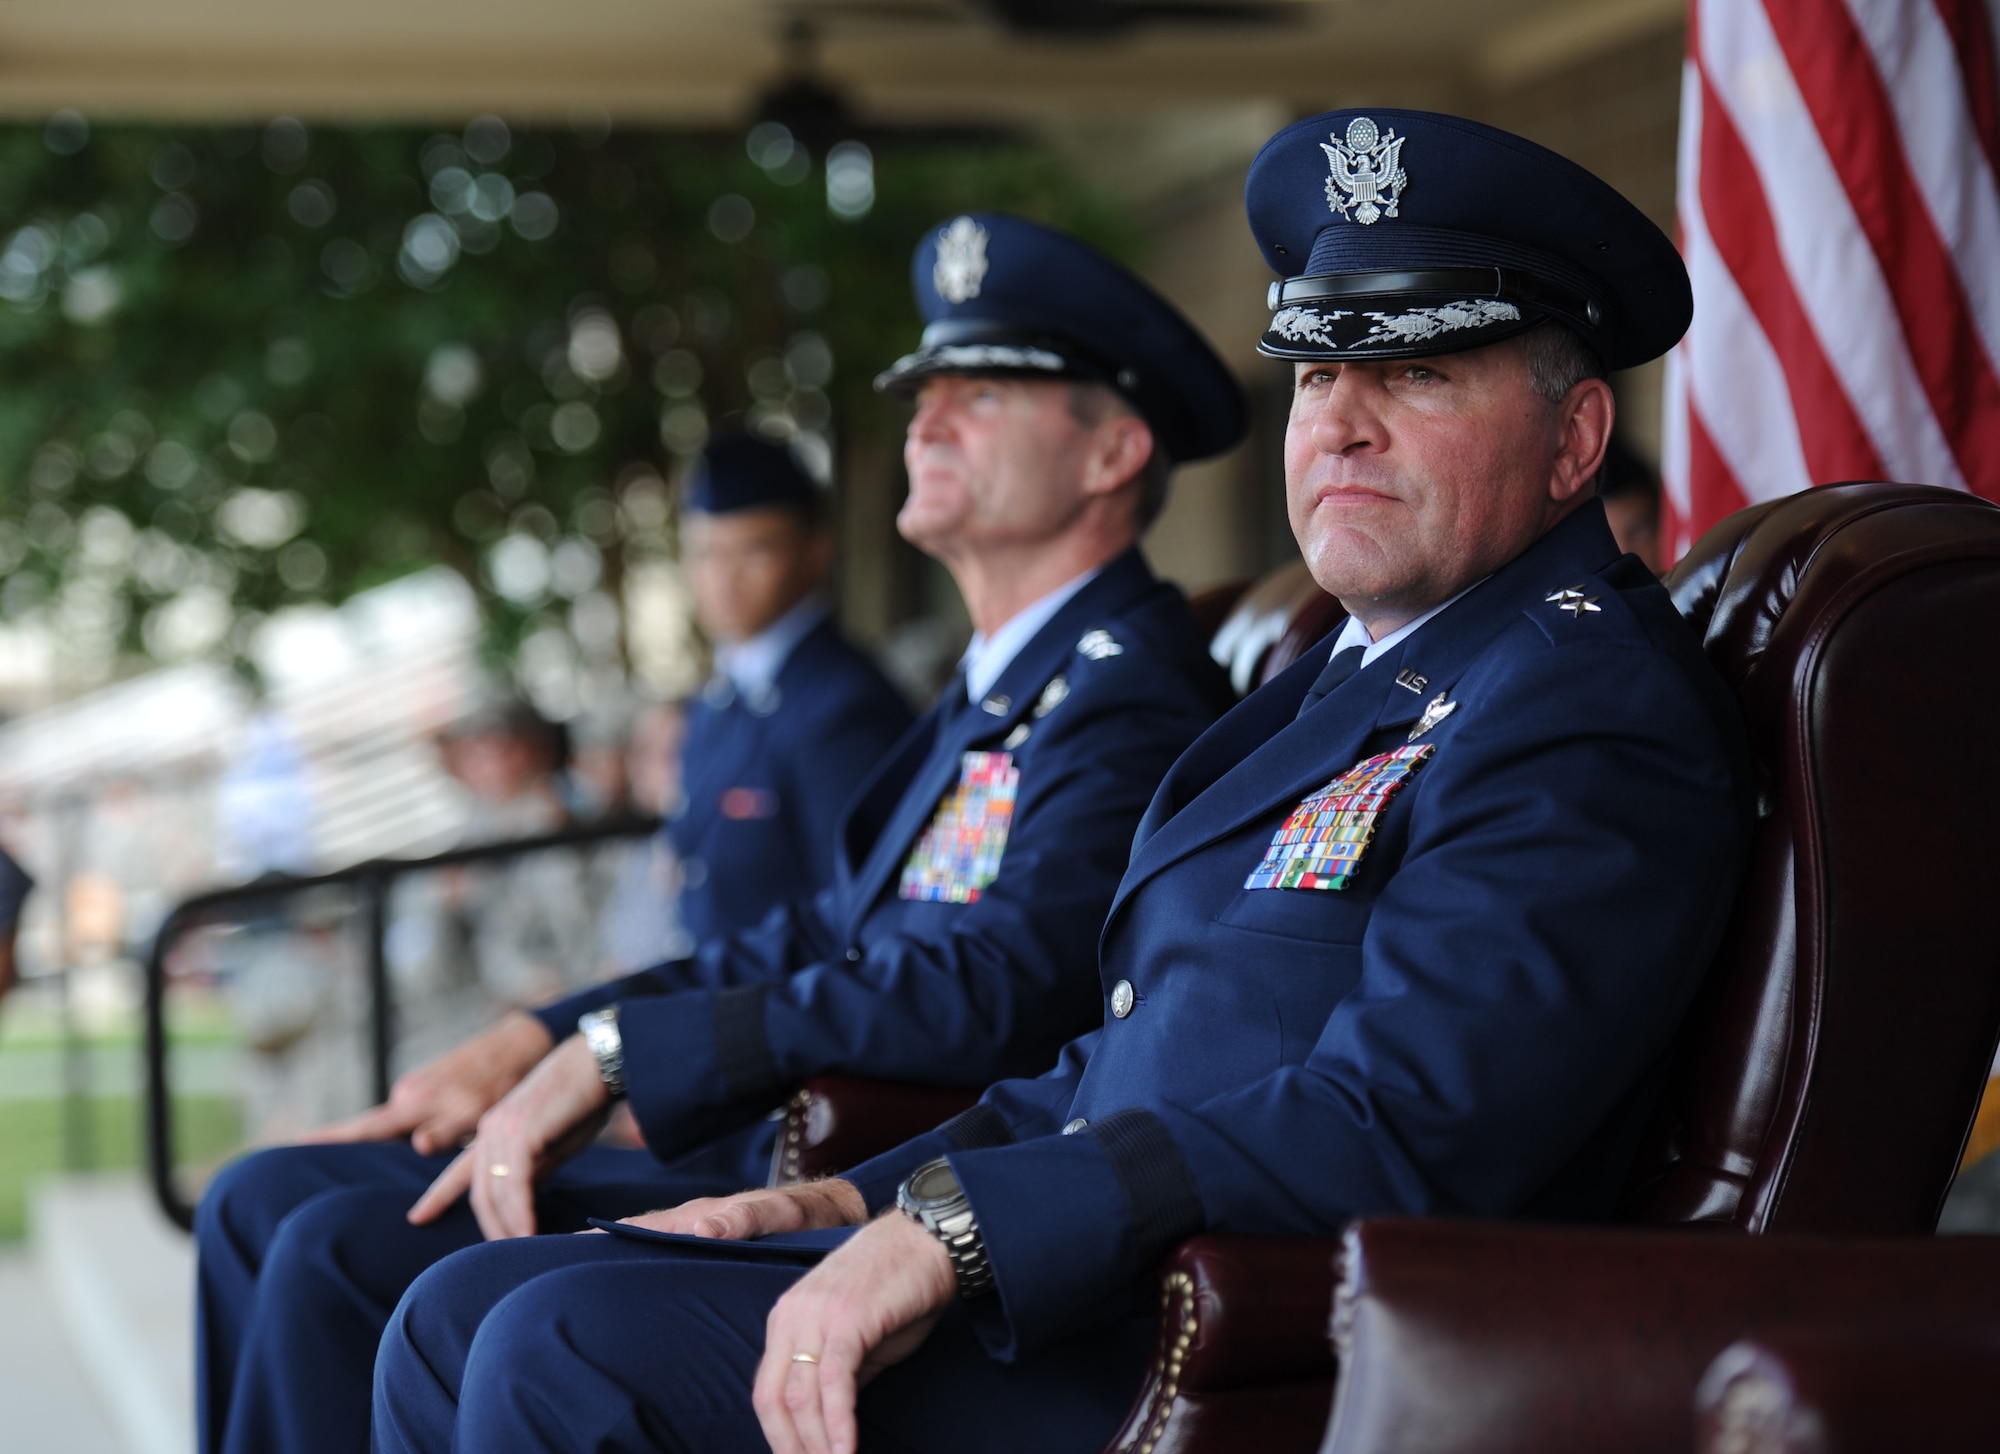 Maj. Gen. Timothy Leahy, 2nd Air Force commander, sits on stage during the 2nd AF change of command ceremony at the Levitow Training Support Facility Aug. 23, 2017, on Keesler Air Force Base, Miss. (U.S. Air Force photo by Kemberly Groue)